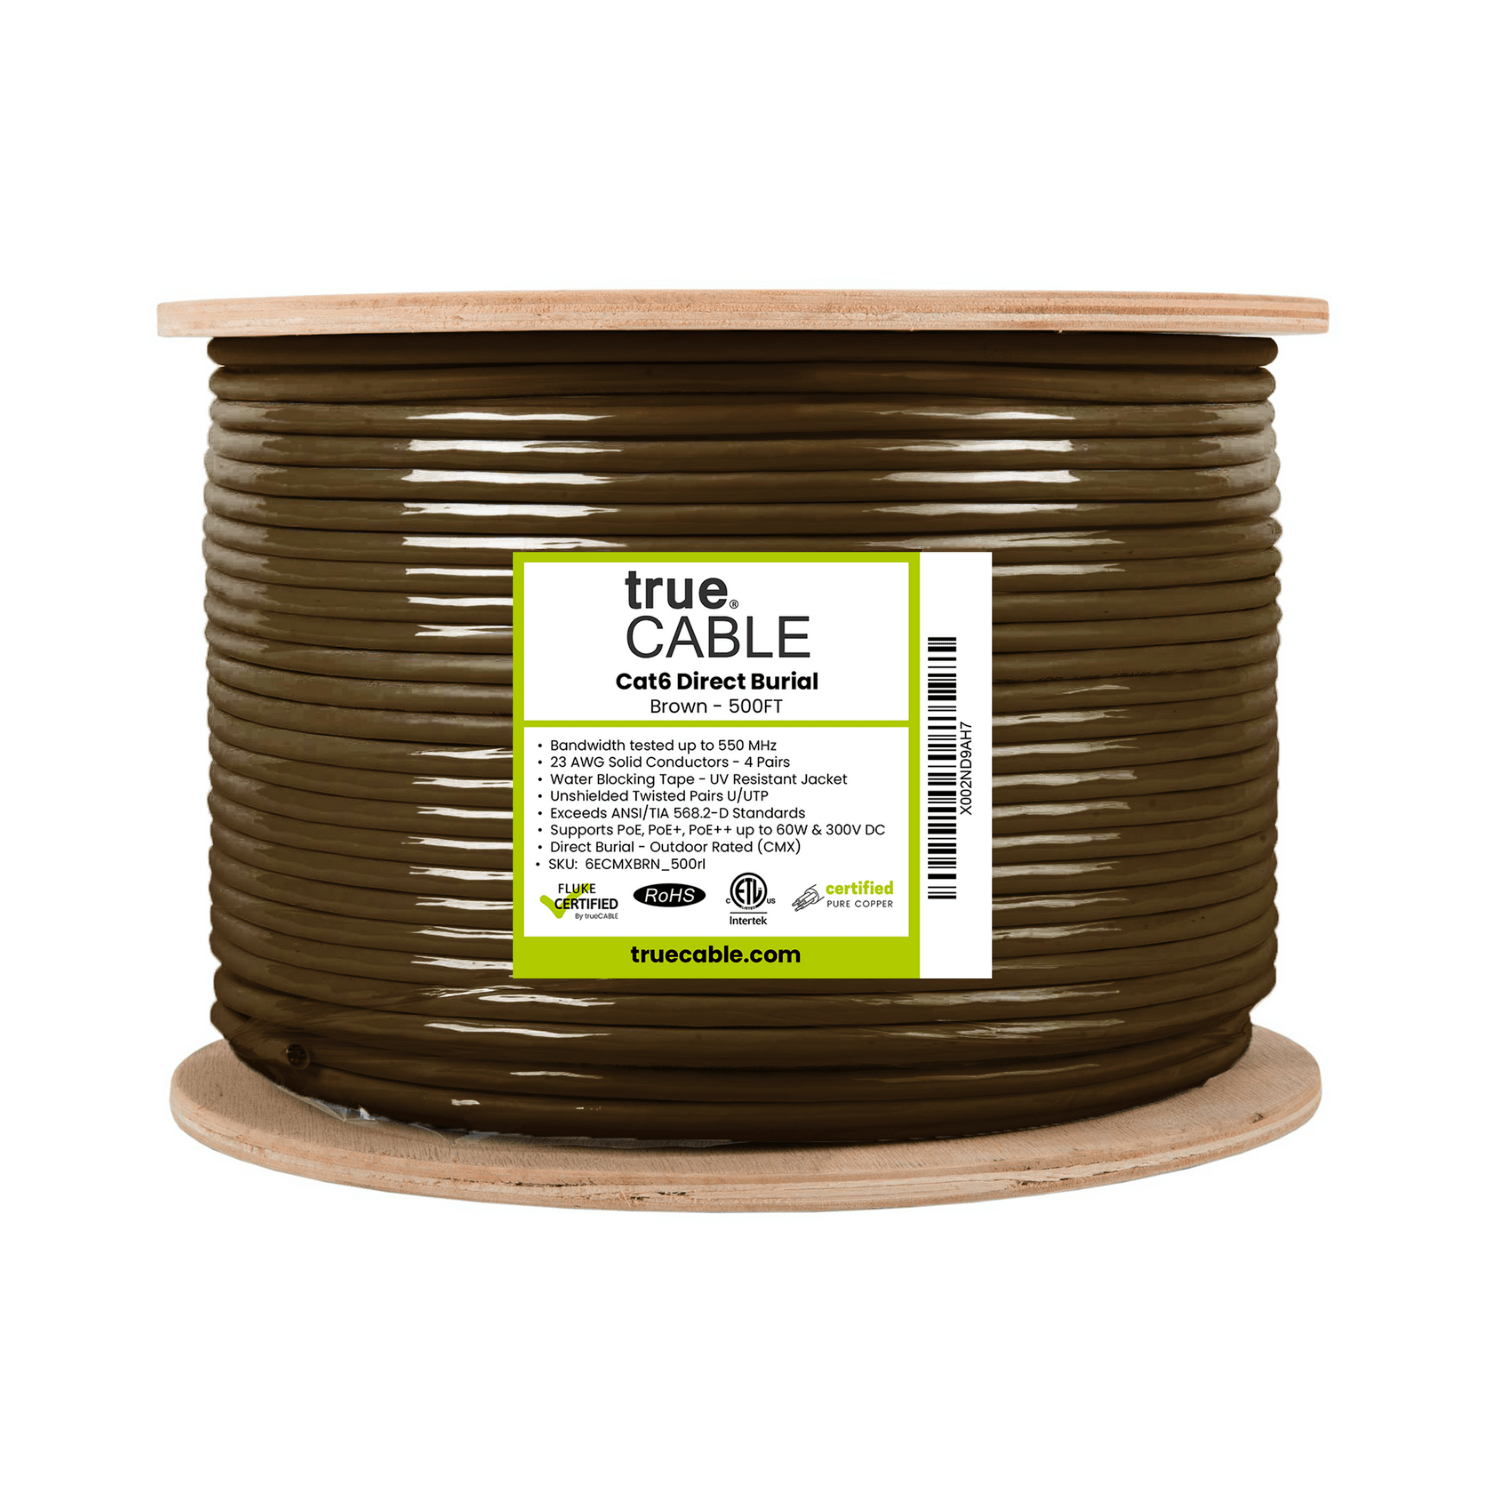 trueCABLE Cat6 Direct Burial, 500ft, Waterproof, Outdoor Rated CMX, Brown, 23AWG Solid Bare Copper, 550Mhz, PoE++ (4PPoE), ETL Listed, Unshielded